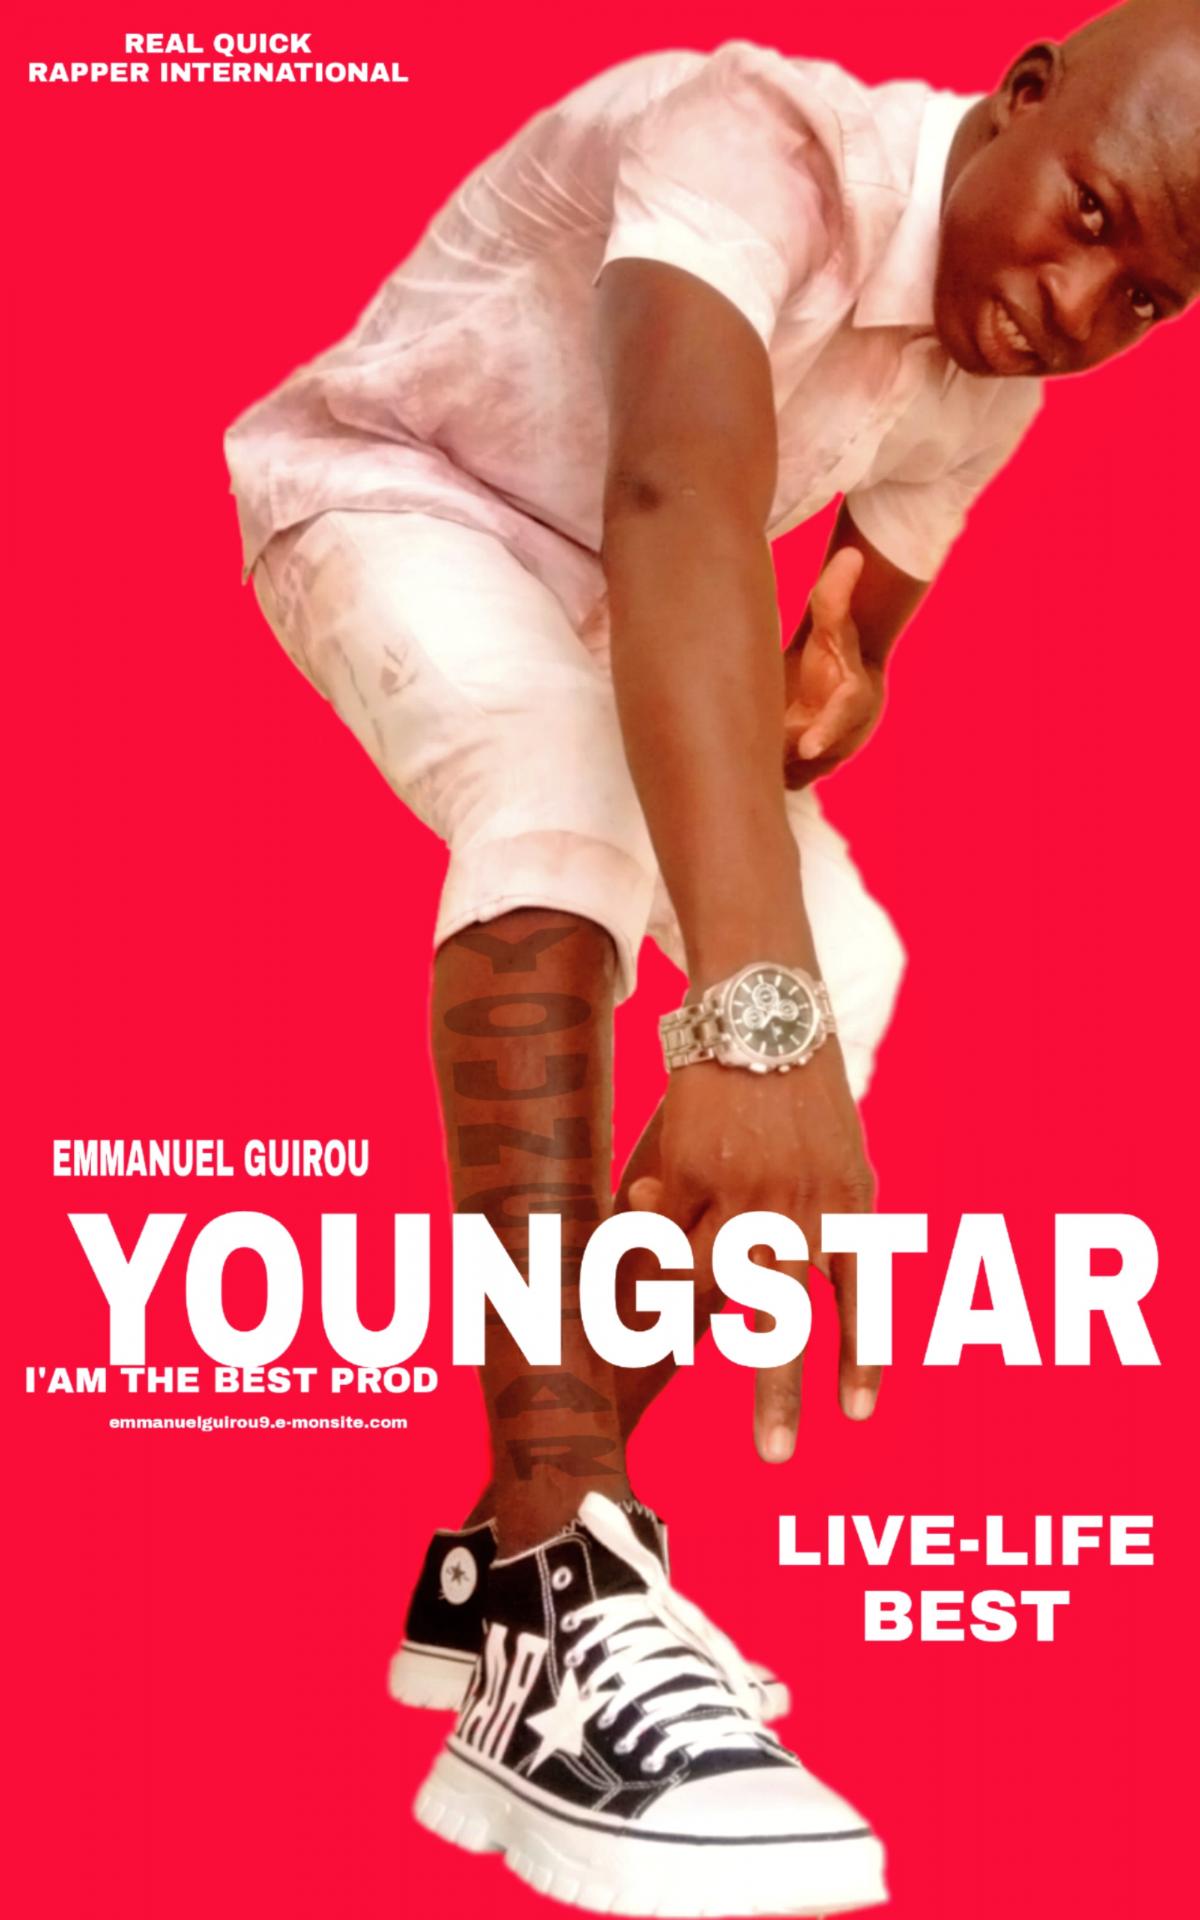 YOUNGSTAR I'AM THE BEST PROD